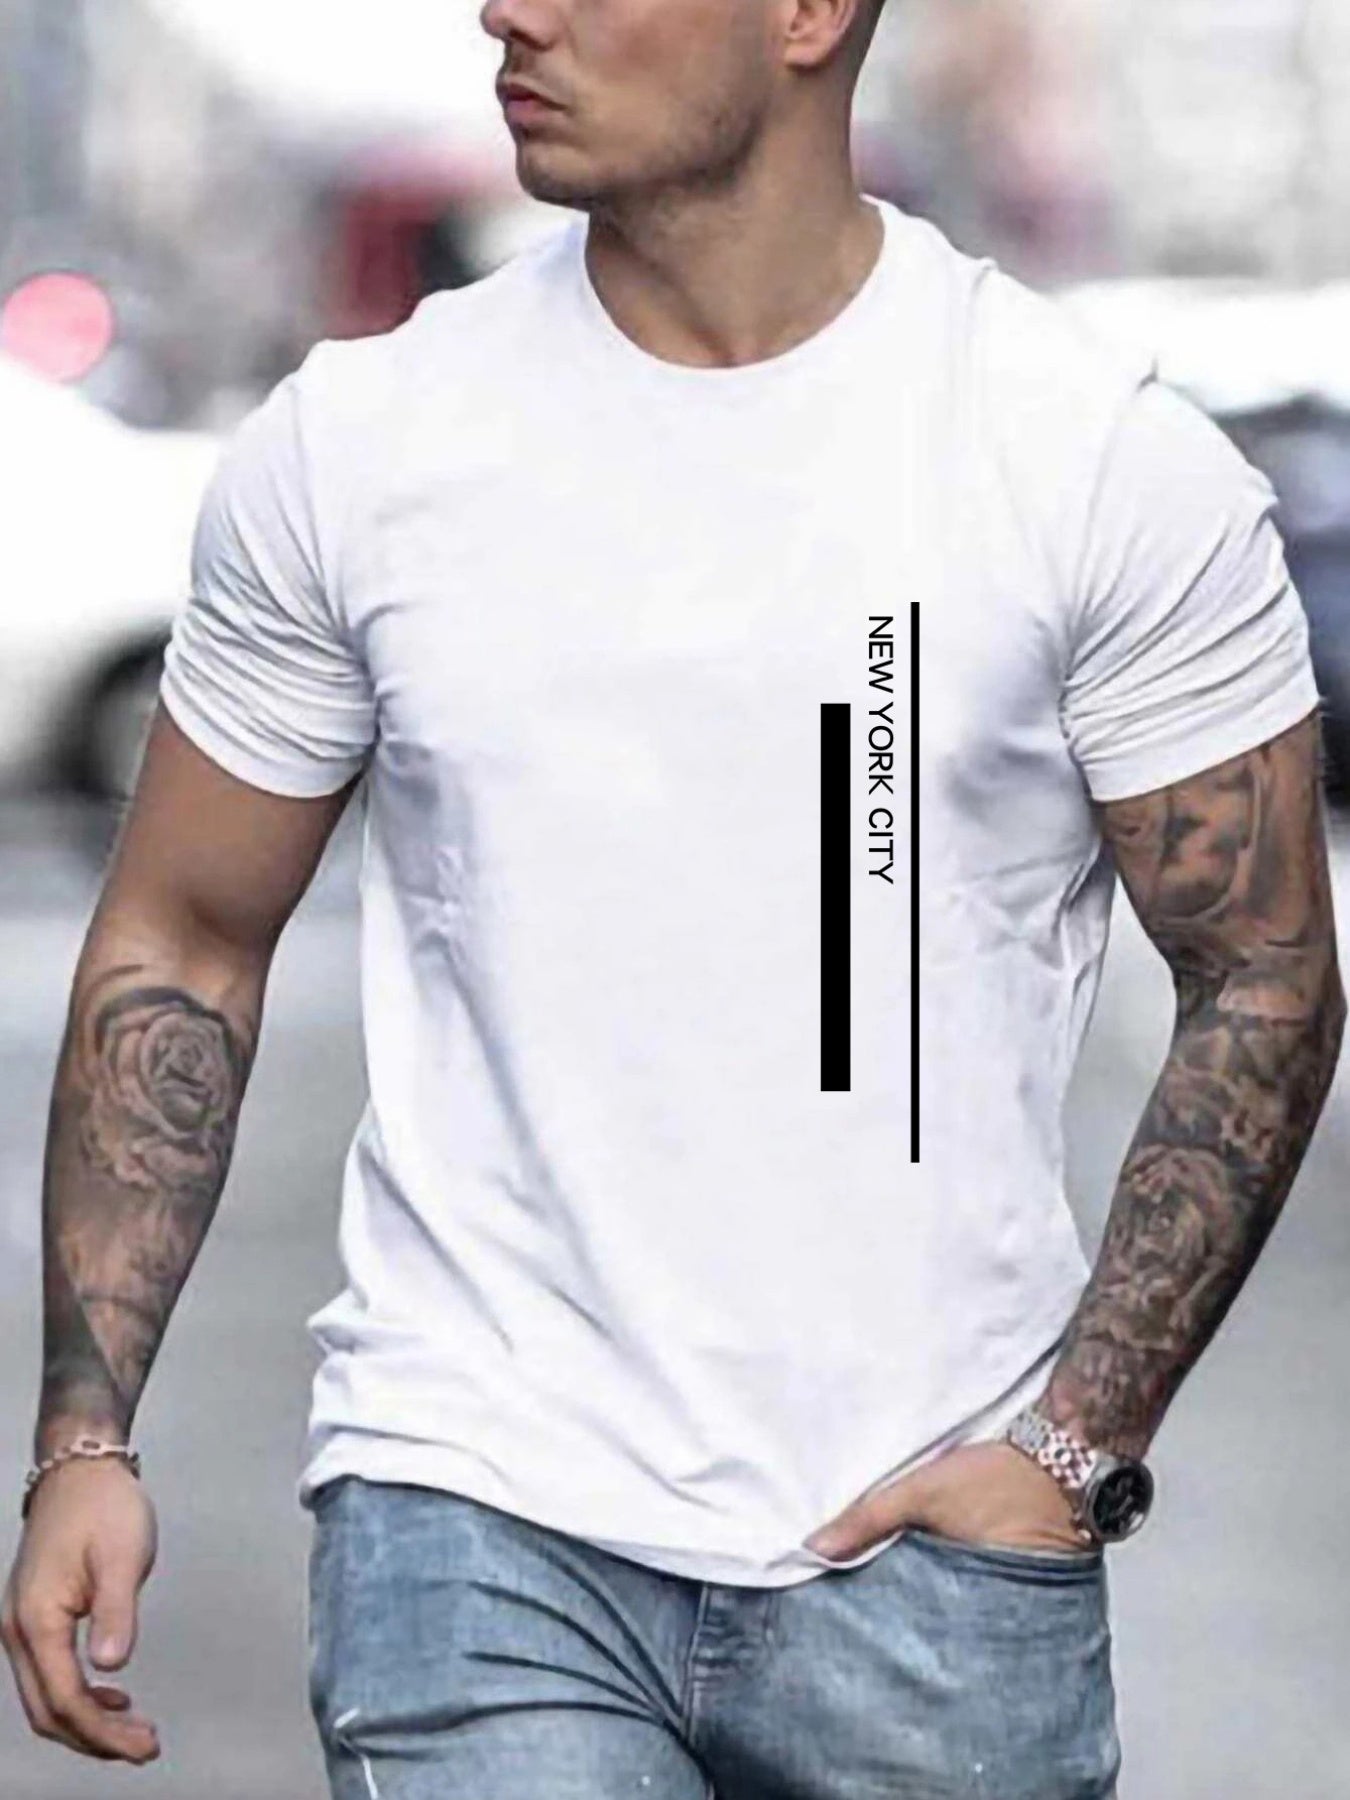 Men's Casual T-shirt With "PEACE" Print, Short Sleeve Crew Neck Tee For Summer